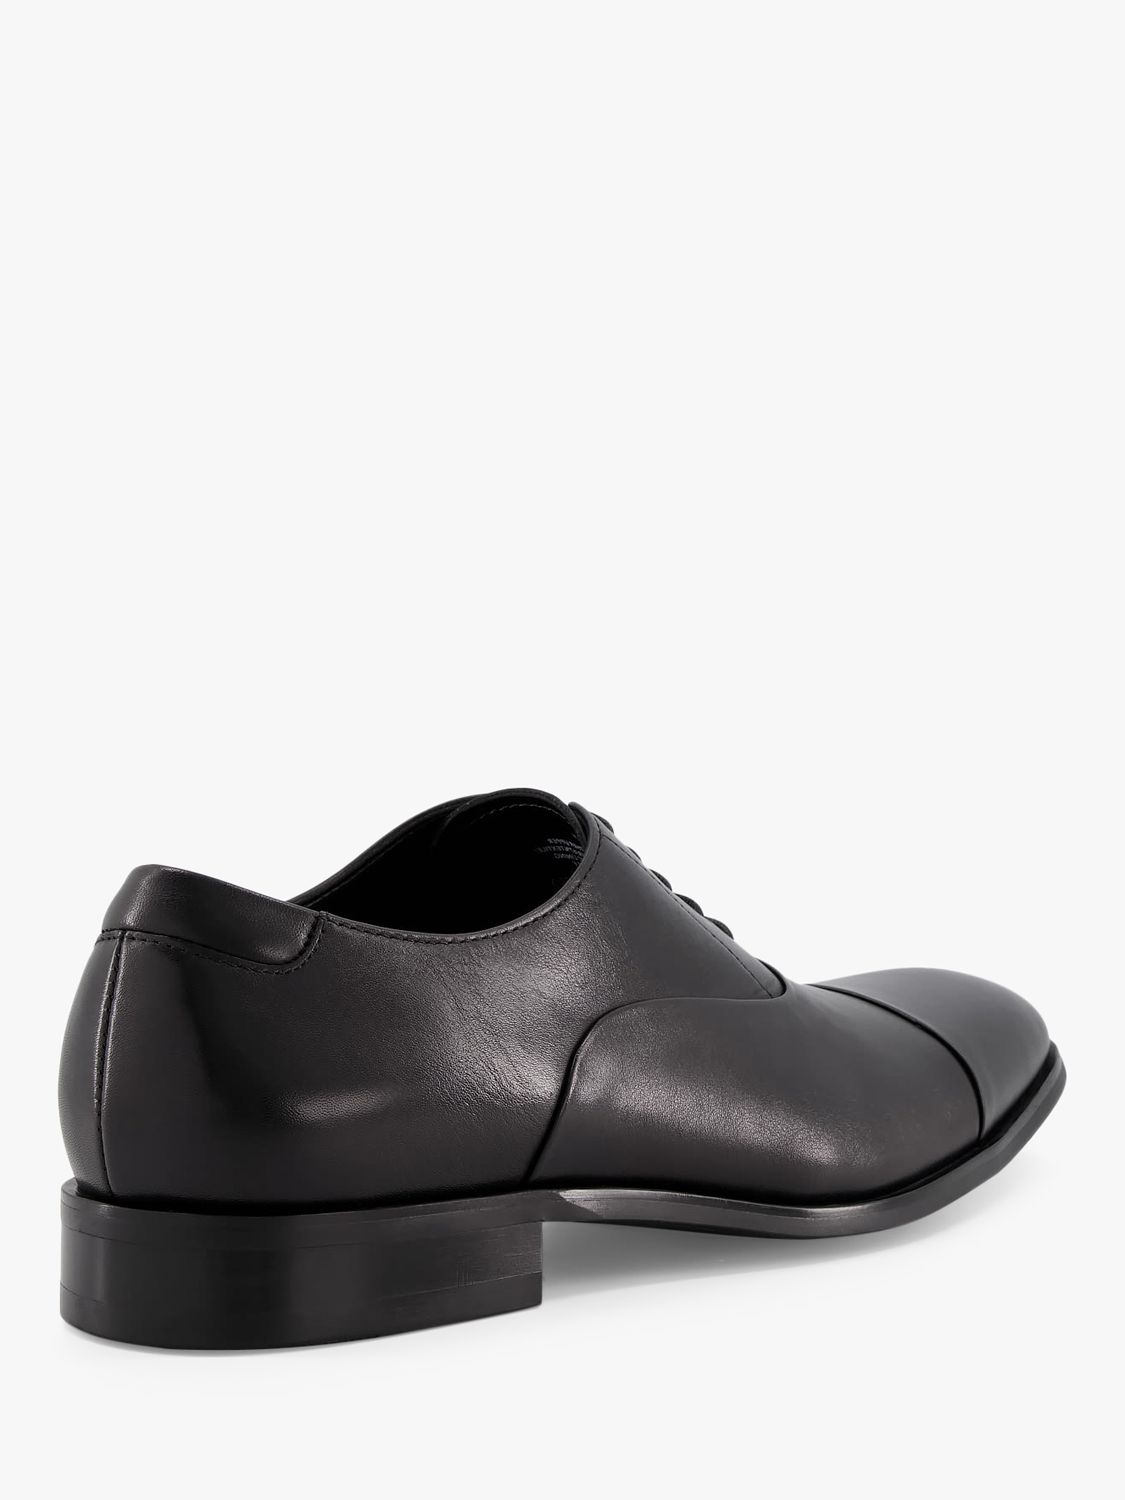 Buy Dune Secrecy Leather Derby Shoes Online at johnlewis.com